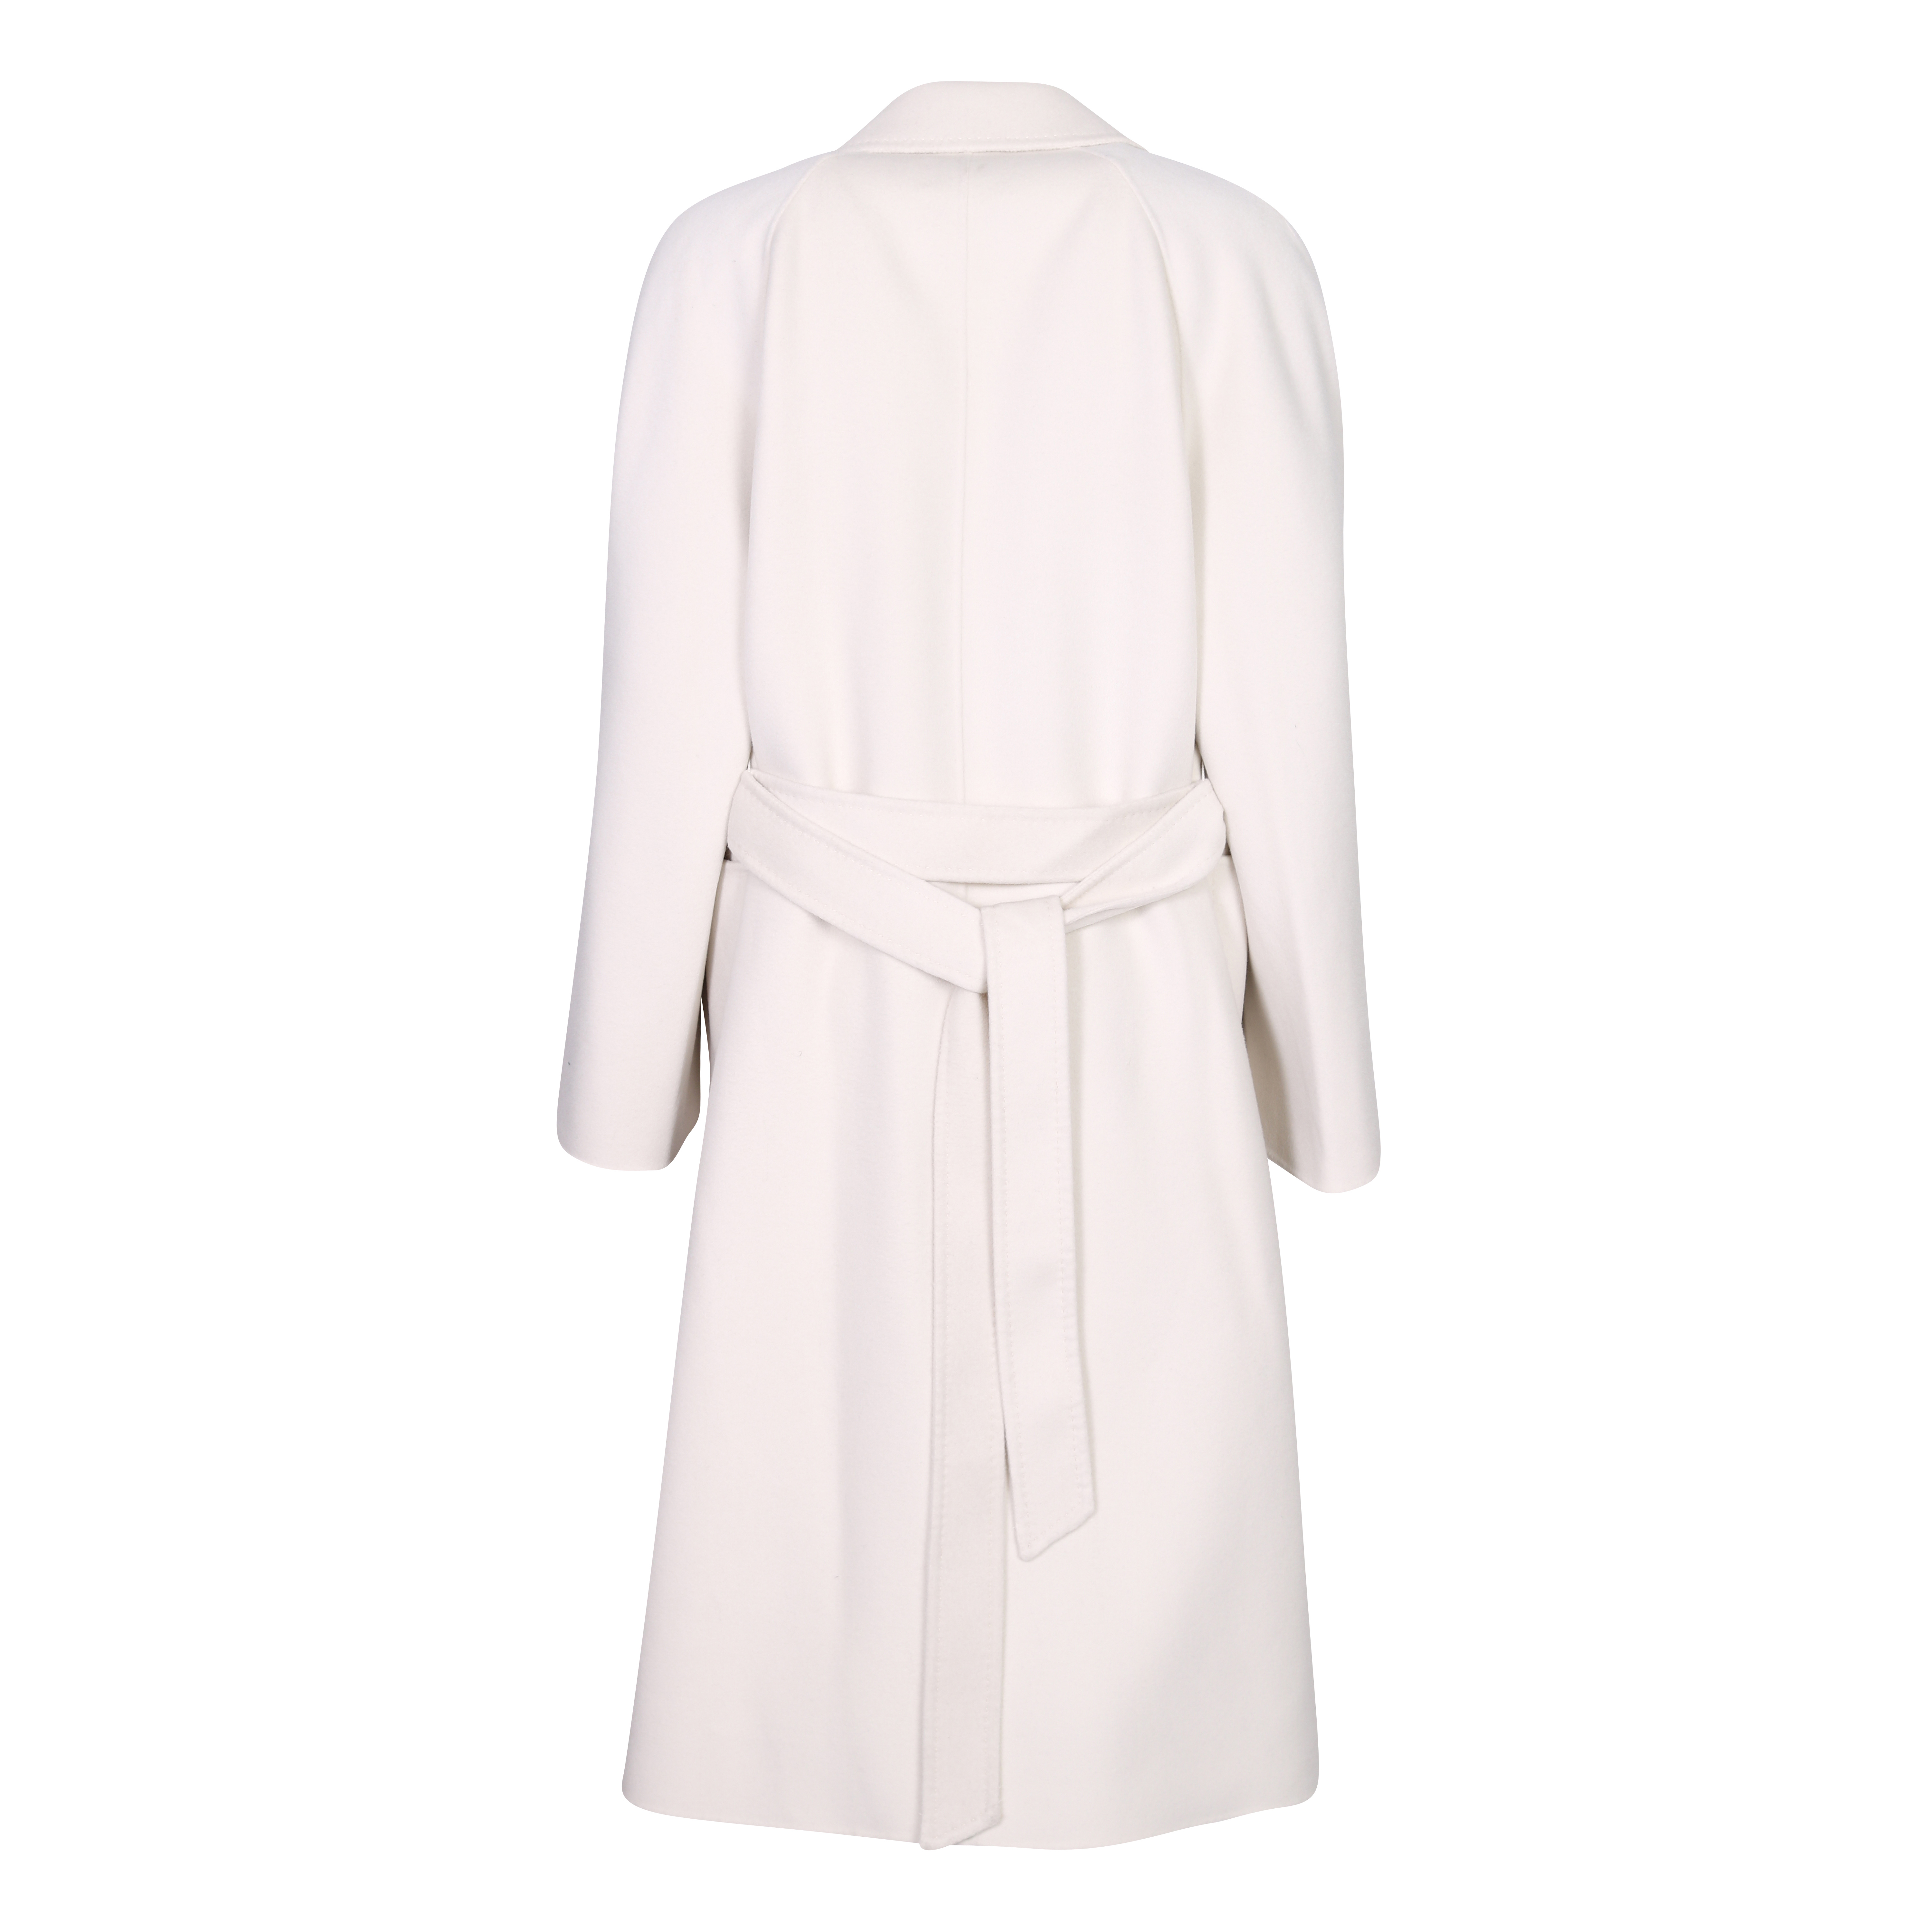 Flona Wool/Cashmere Coat in Offwhite XS/S